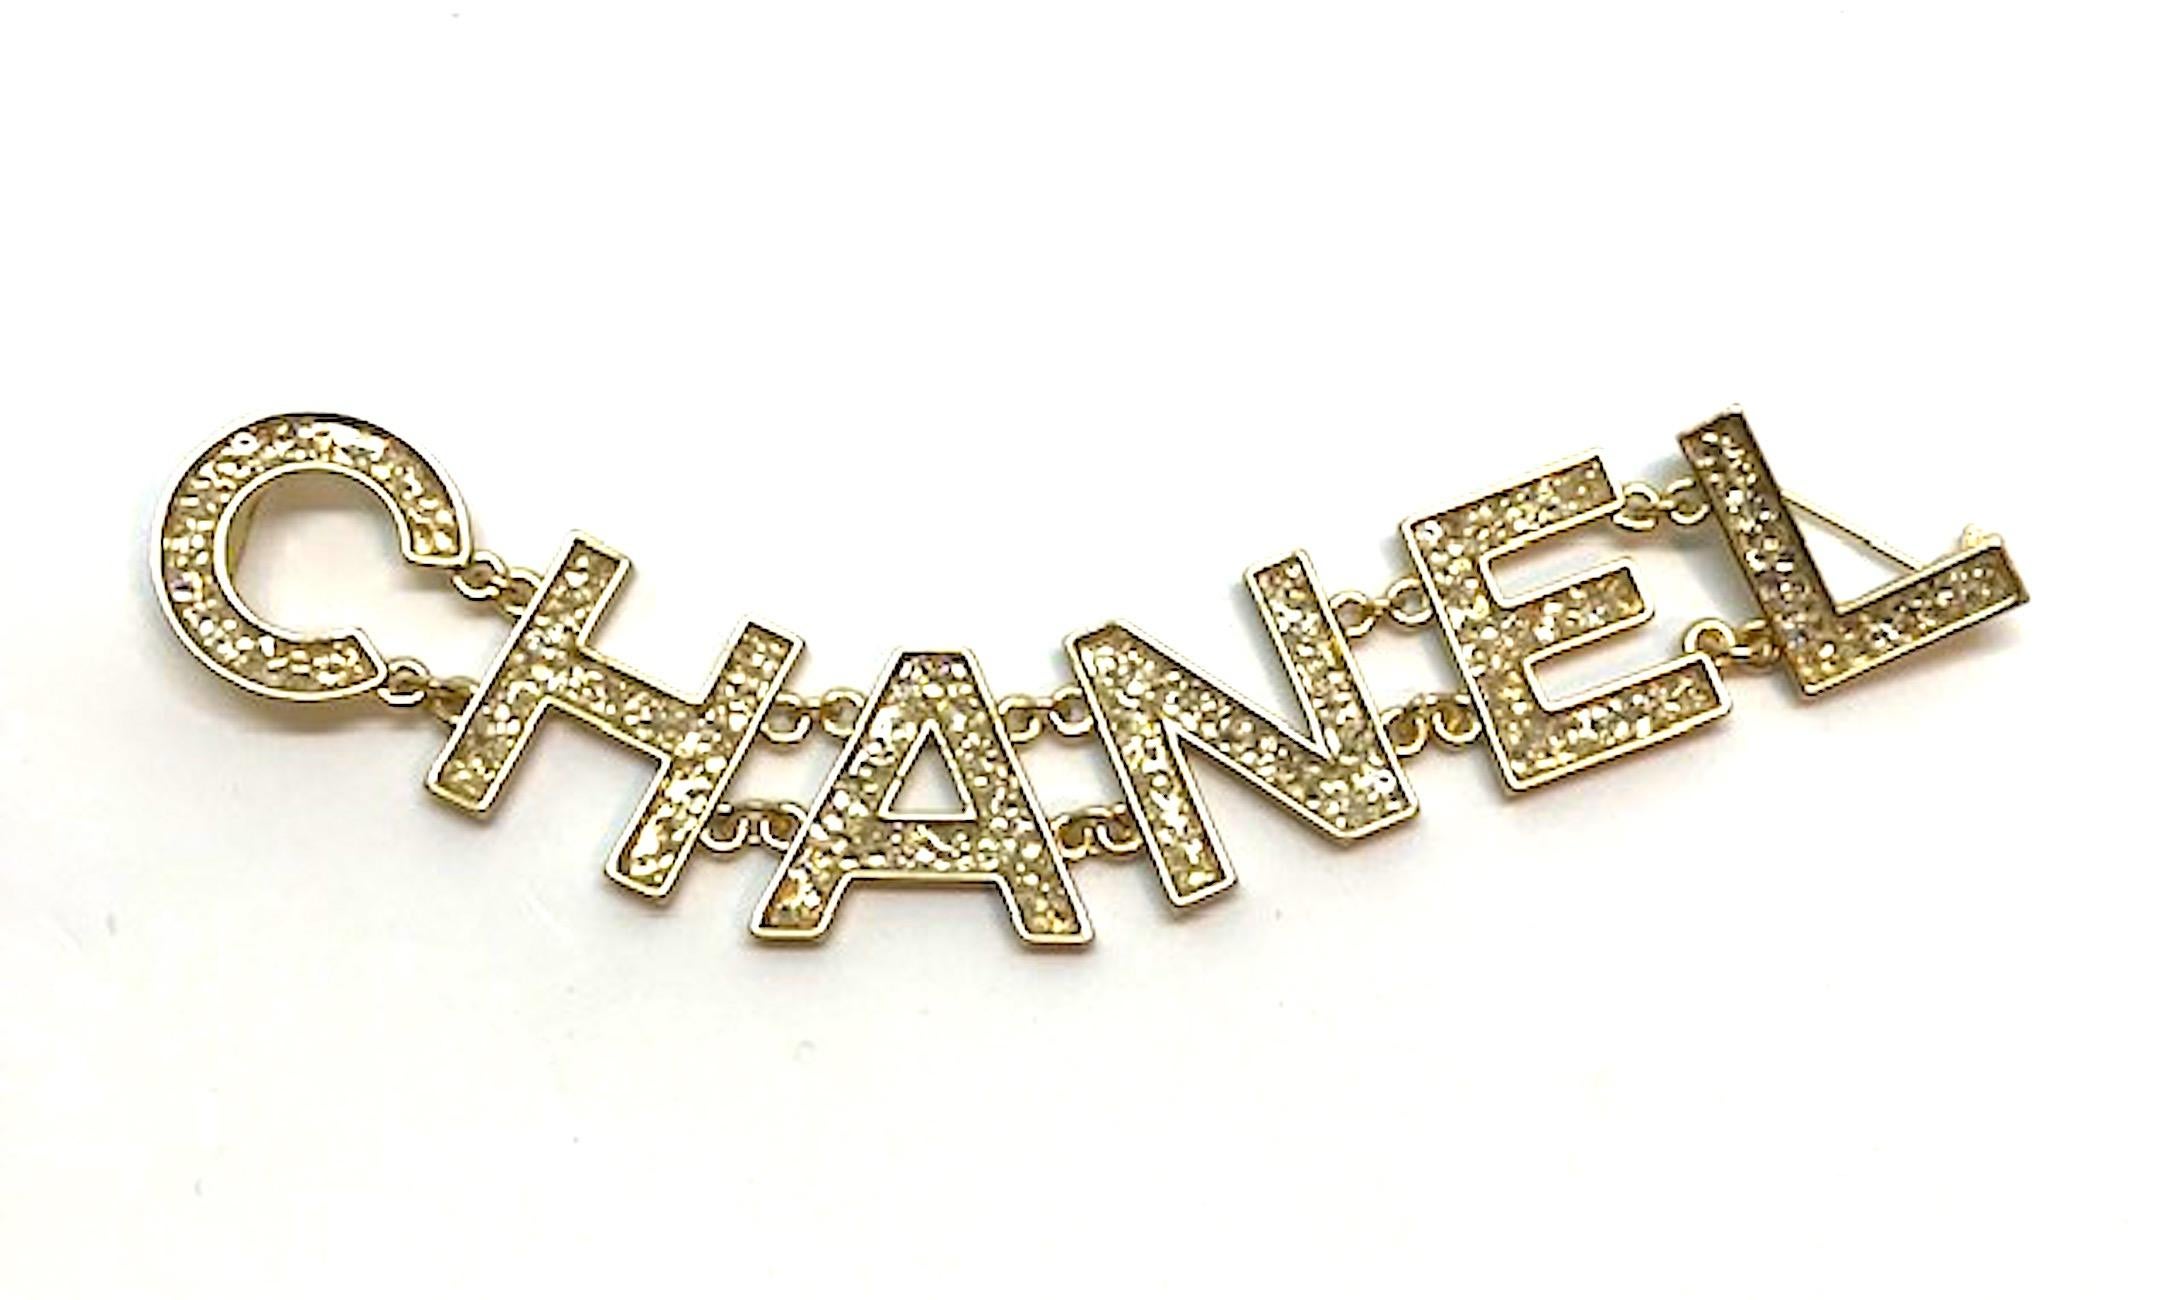 Chanel 2018 name in large pave' crystals and gold letters. Each letter is connected to the next with two sets of small links. Gold plate body. Each letter is filled with flat back mini crystals in a pave' style. Two pin backings. One on the 